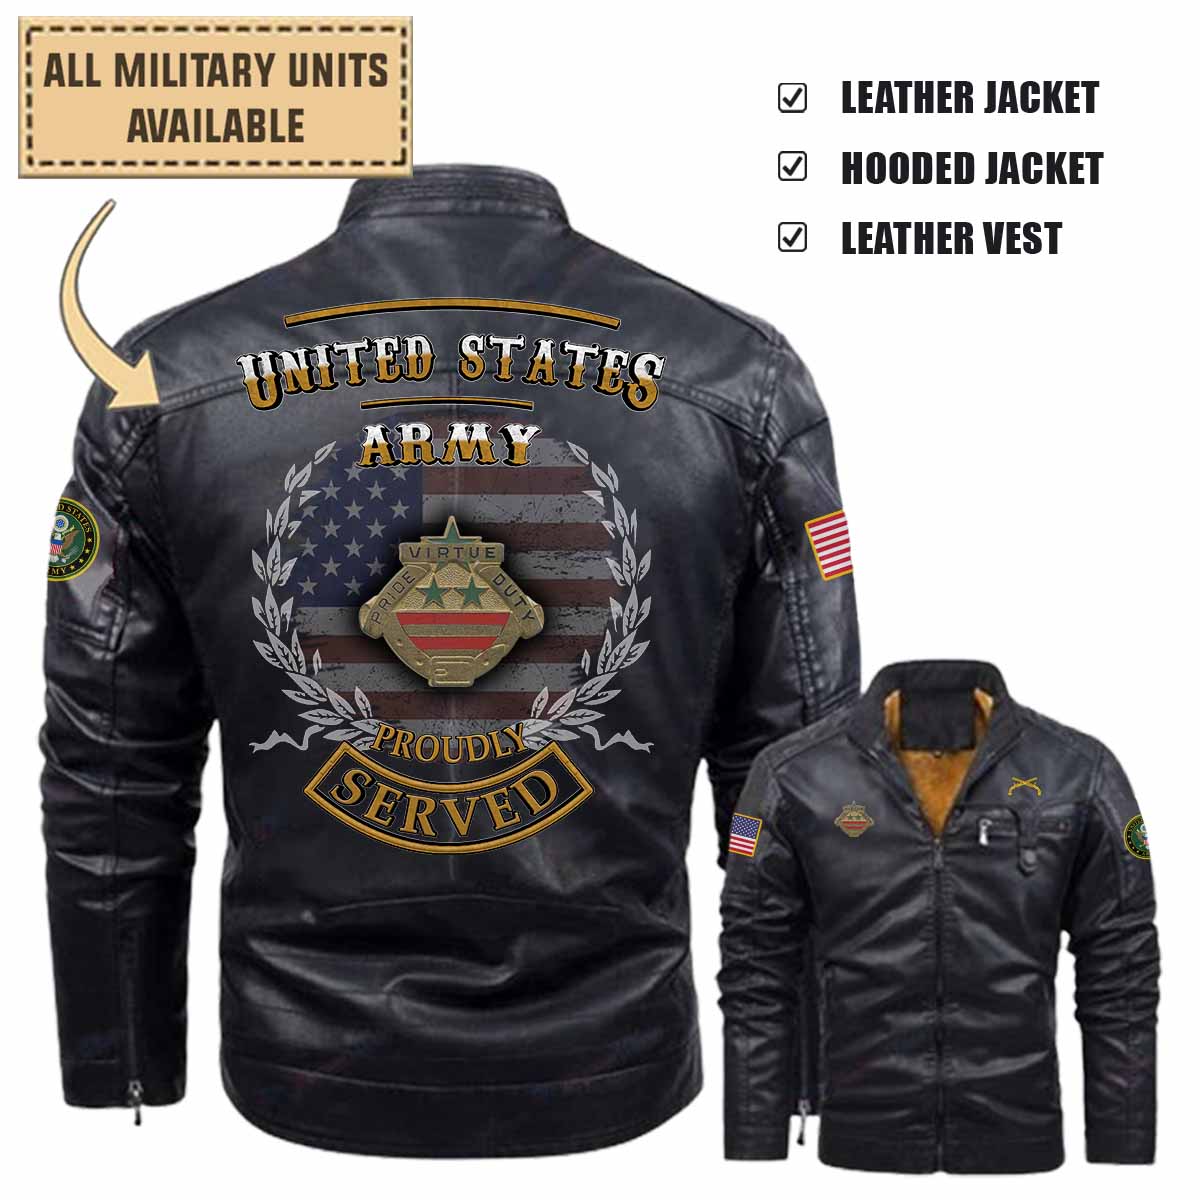 392nd MP BN 392nd Military Police Battalion_Military Leather Jacket and Vest